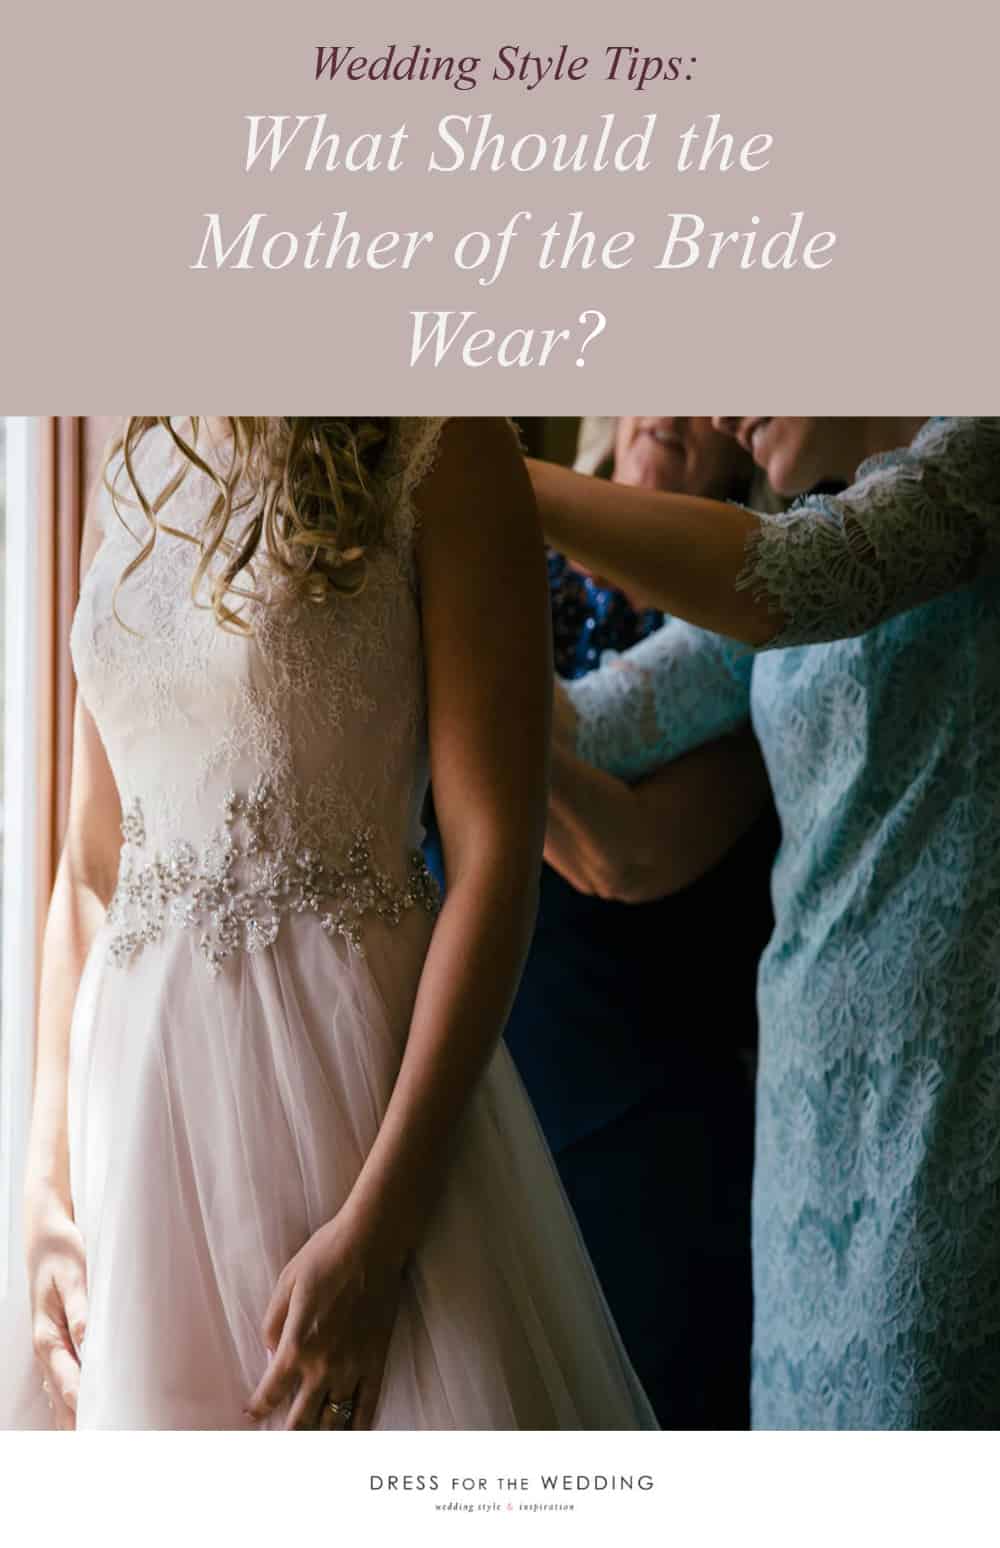 What Should the Mother of the Bride Wear? - Dress for the Wedding